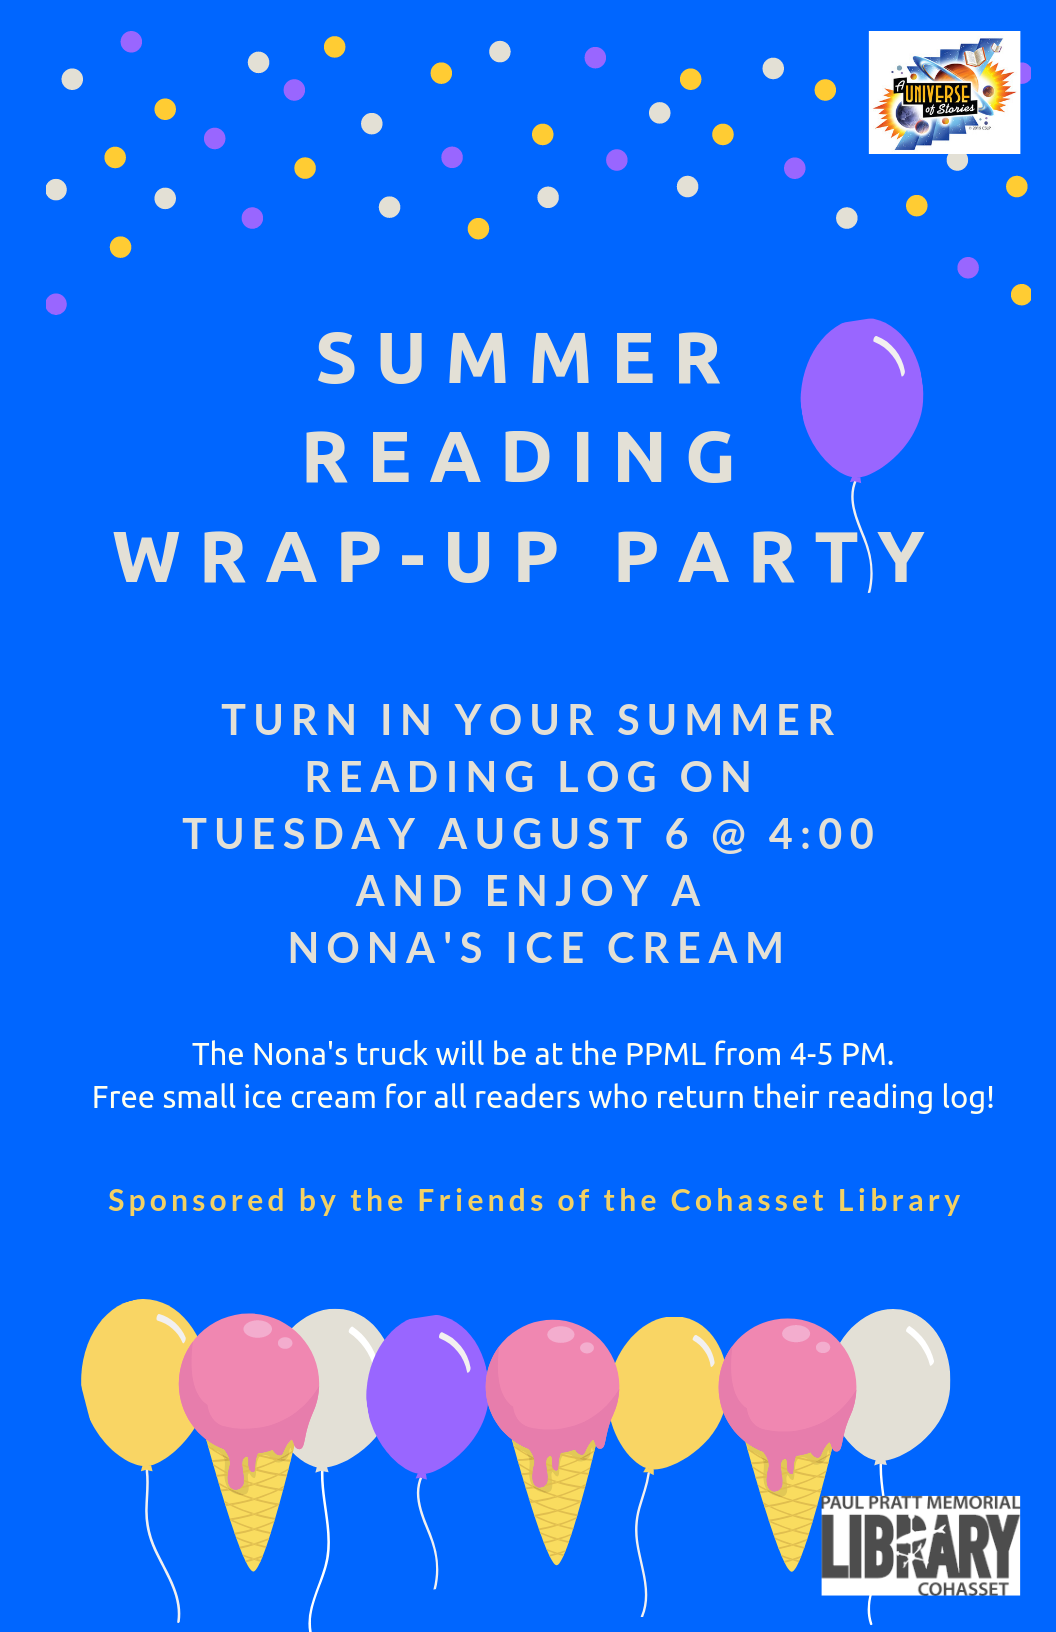 Summer Reading Wrap-Up Party